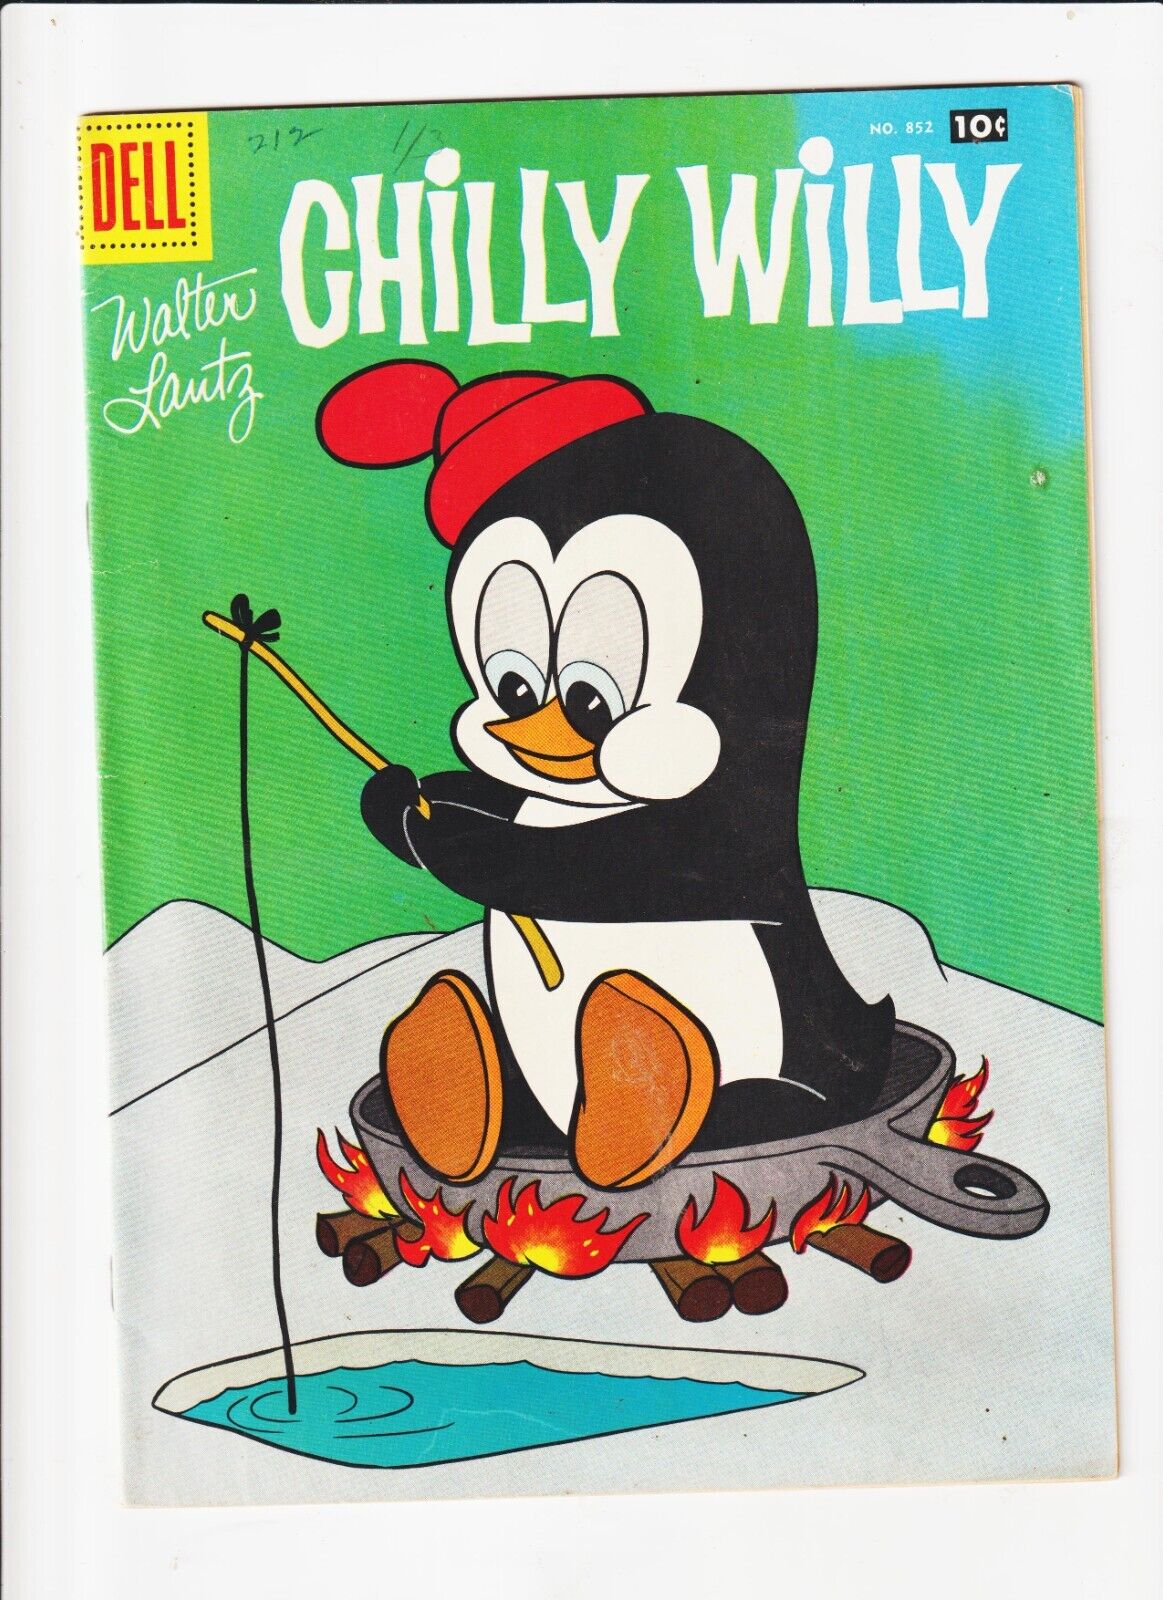 CHILLY WILLY (1959) FOUR 4 COLOR #852 CARTOON Comic Book DELL WEATHER WARFARE